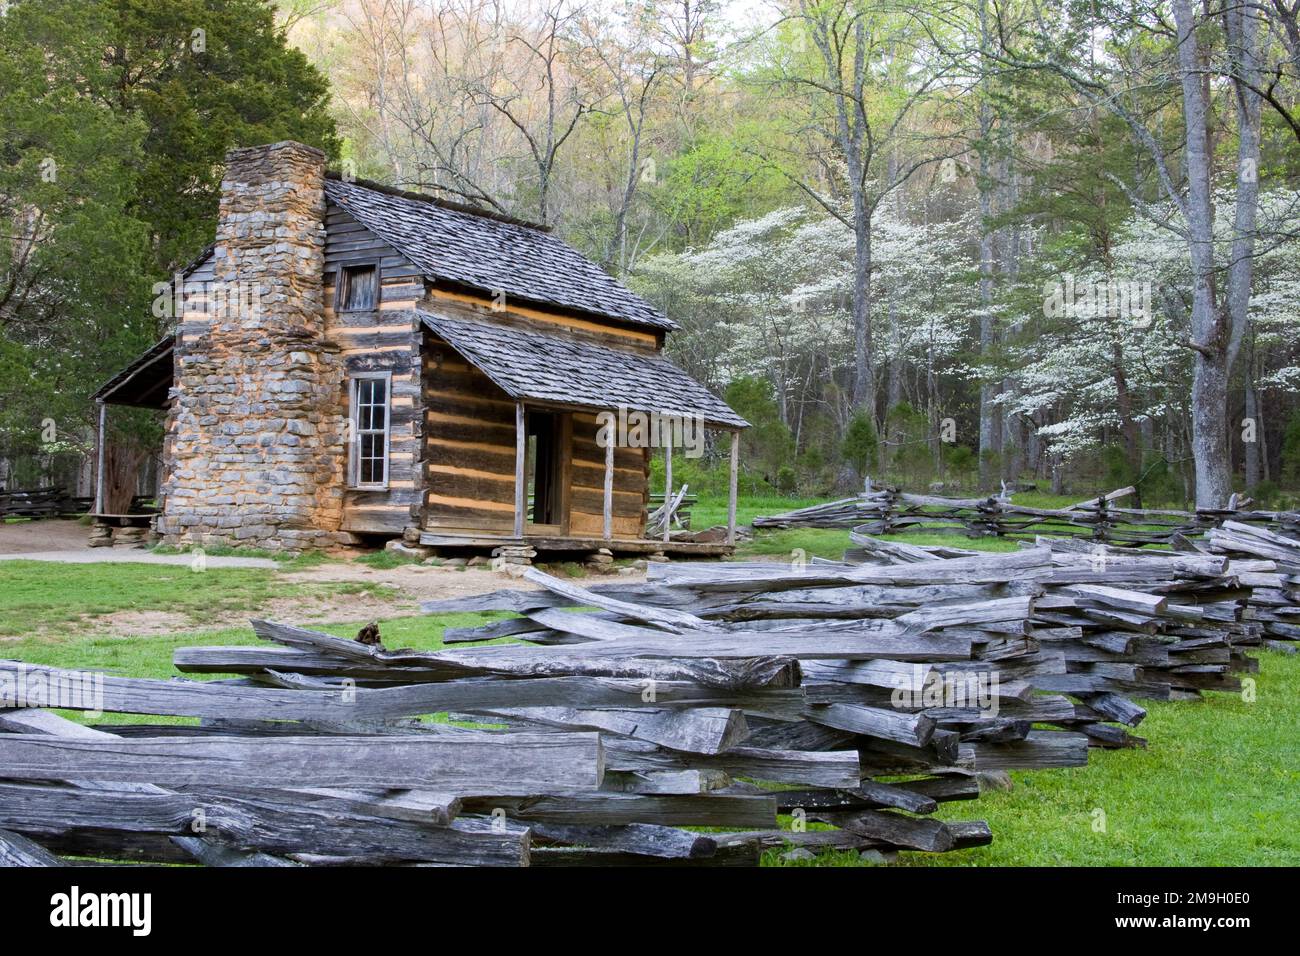 66745-04314 John Oliver Cabin in spring, Cades Cove area, Great Smoky Mountains National Park, TN Stock Photo